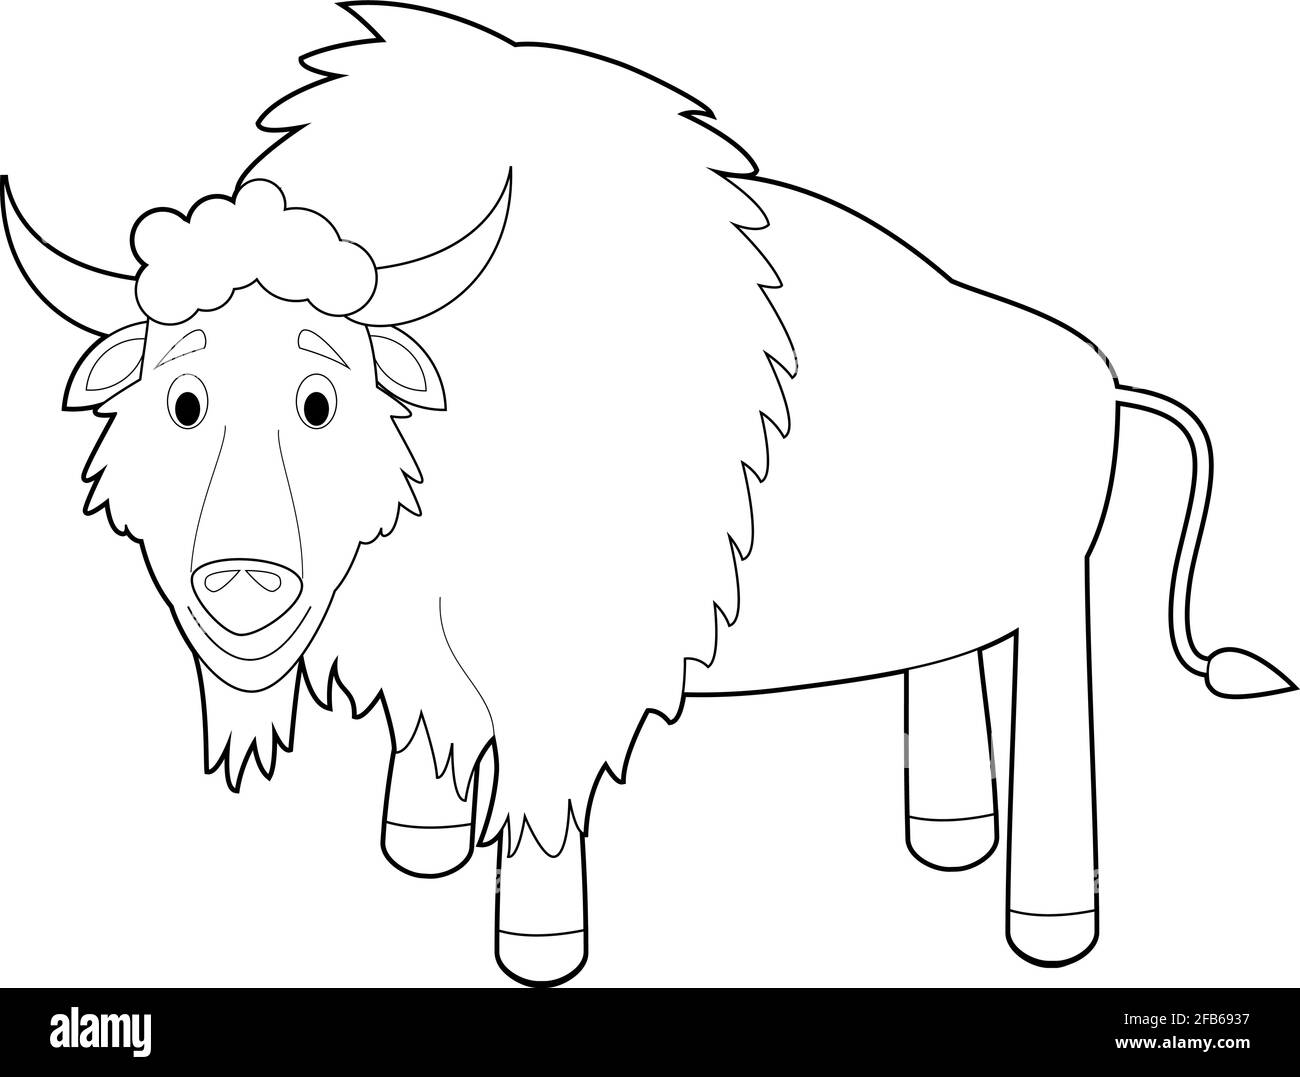 Easy Coloring drawings of animals for little kids: Buffalo Stock Vector